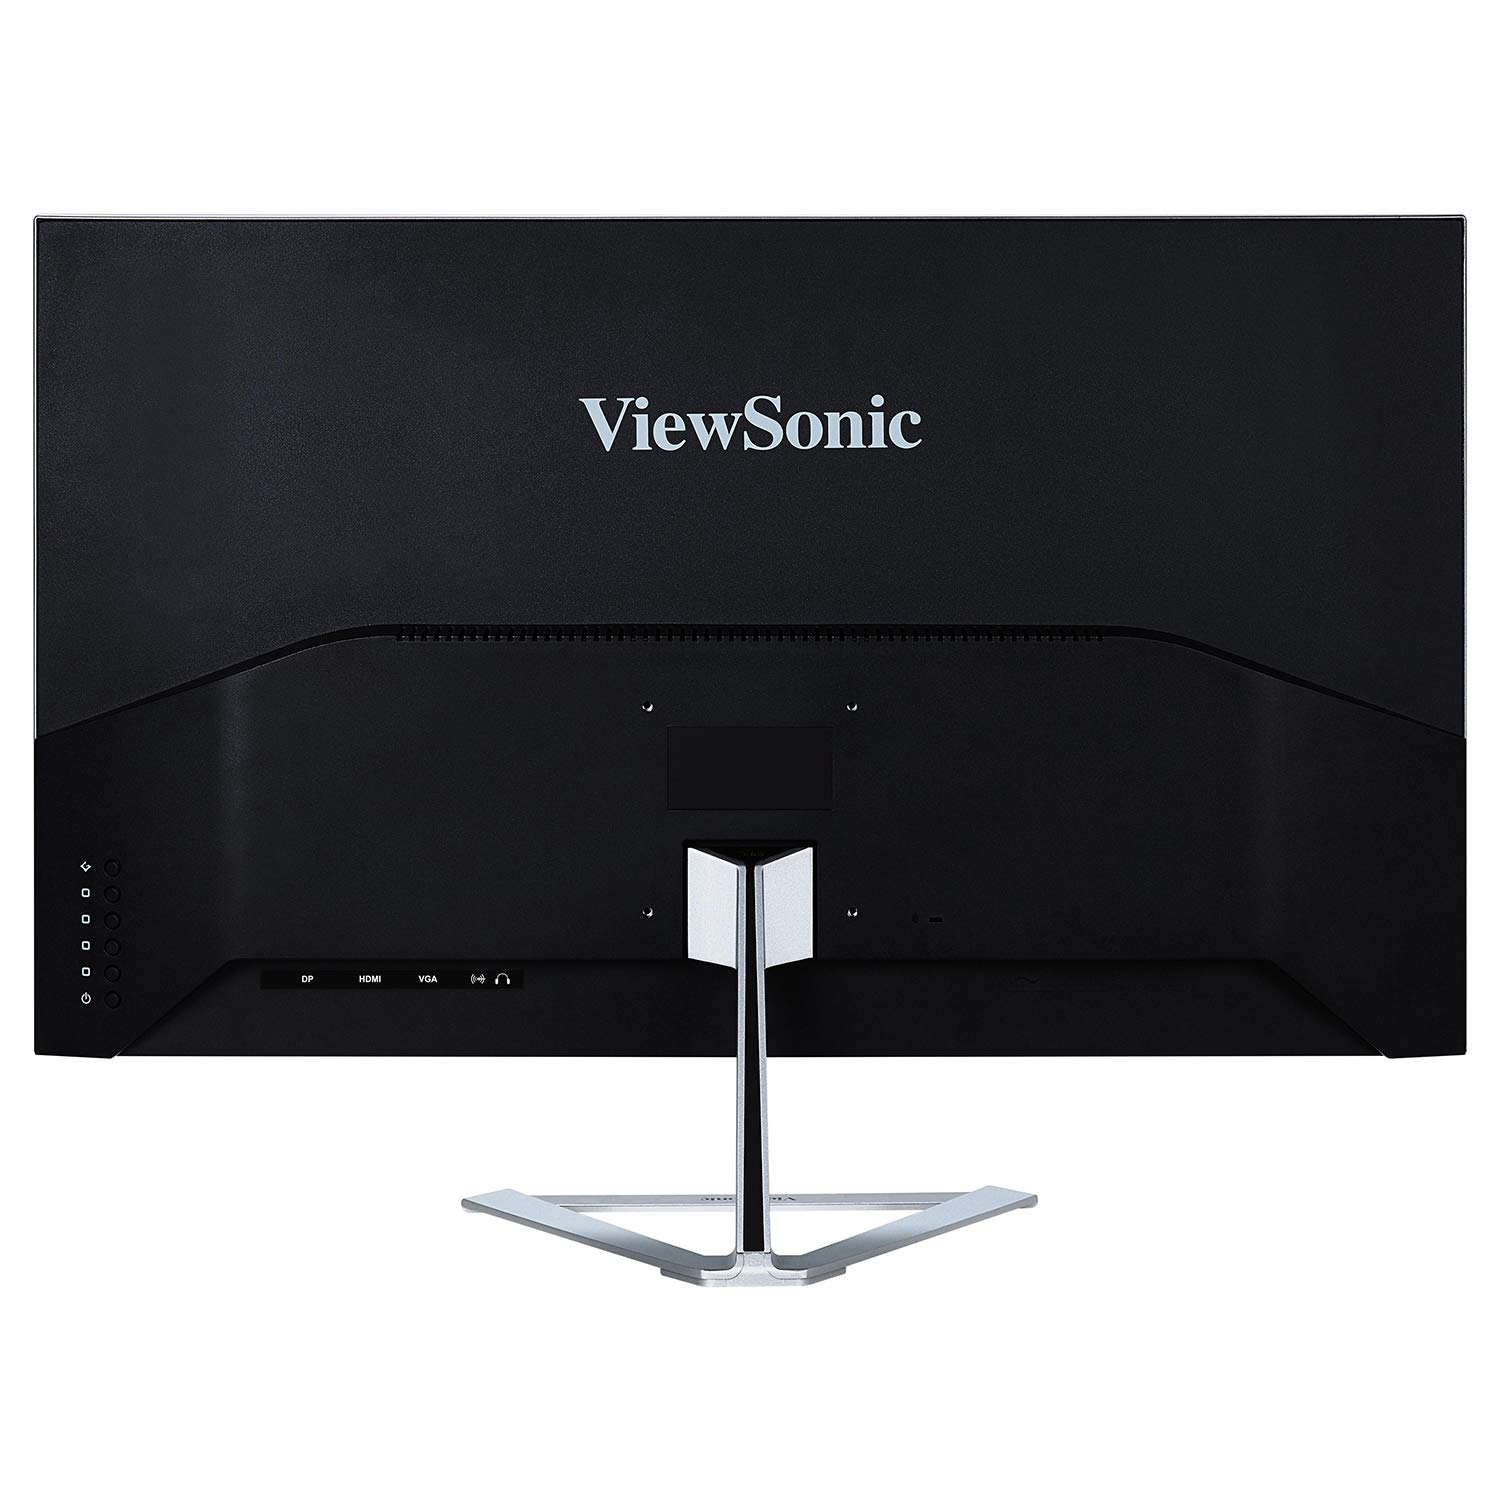 ViewSonic 32 Inch 1080p Widescreen IPS Monitor with Ultra-Thin Bezels, Screen Split Capability HDMI and DisplayPort (VX3276-MHD),blue